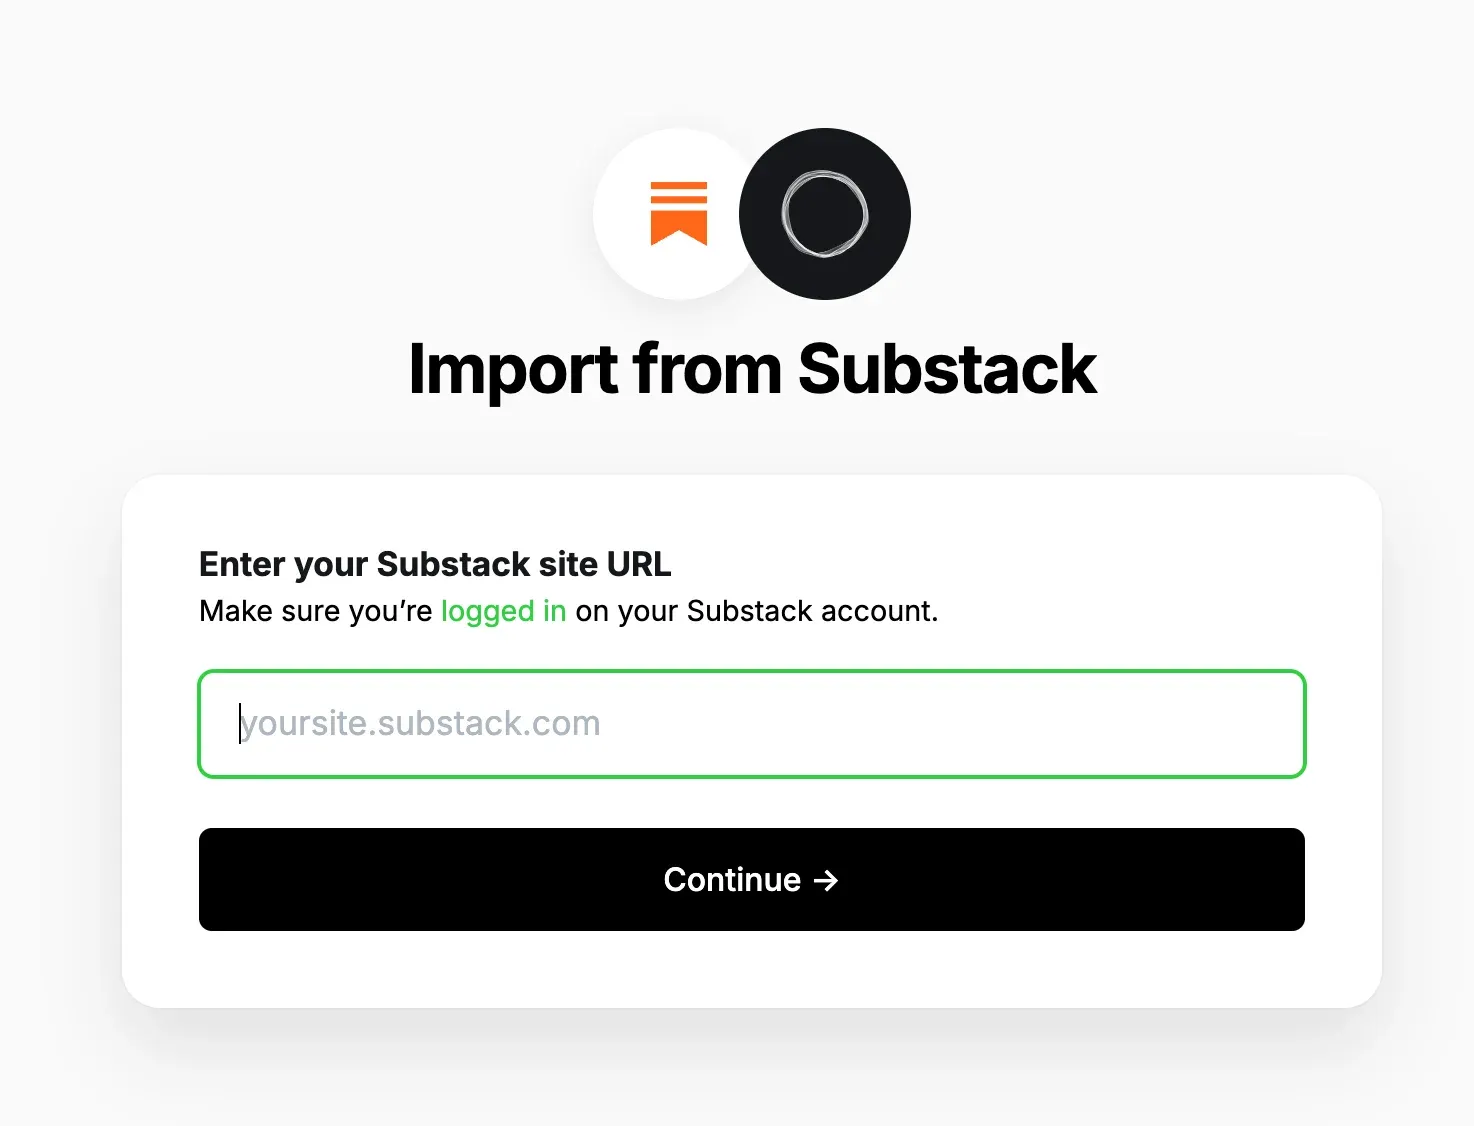 How to migrate from Substack to Ghost CMS